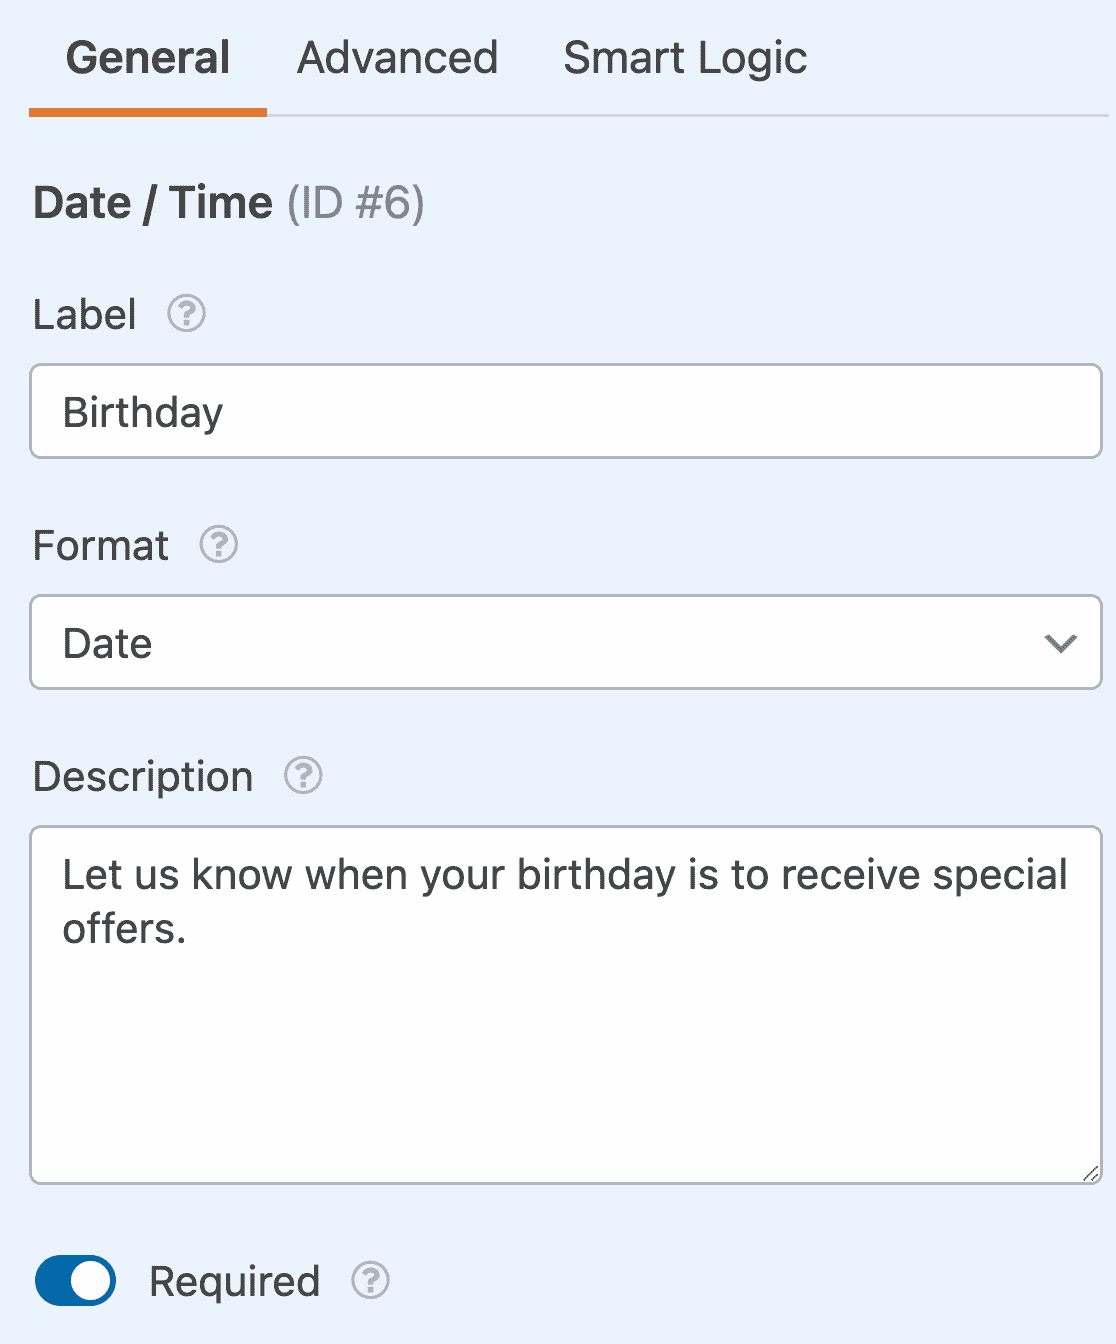 The Date / Time field's field options